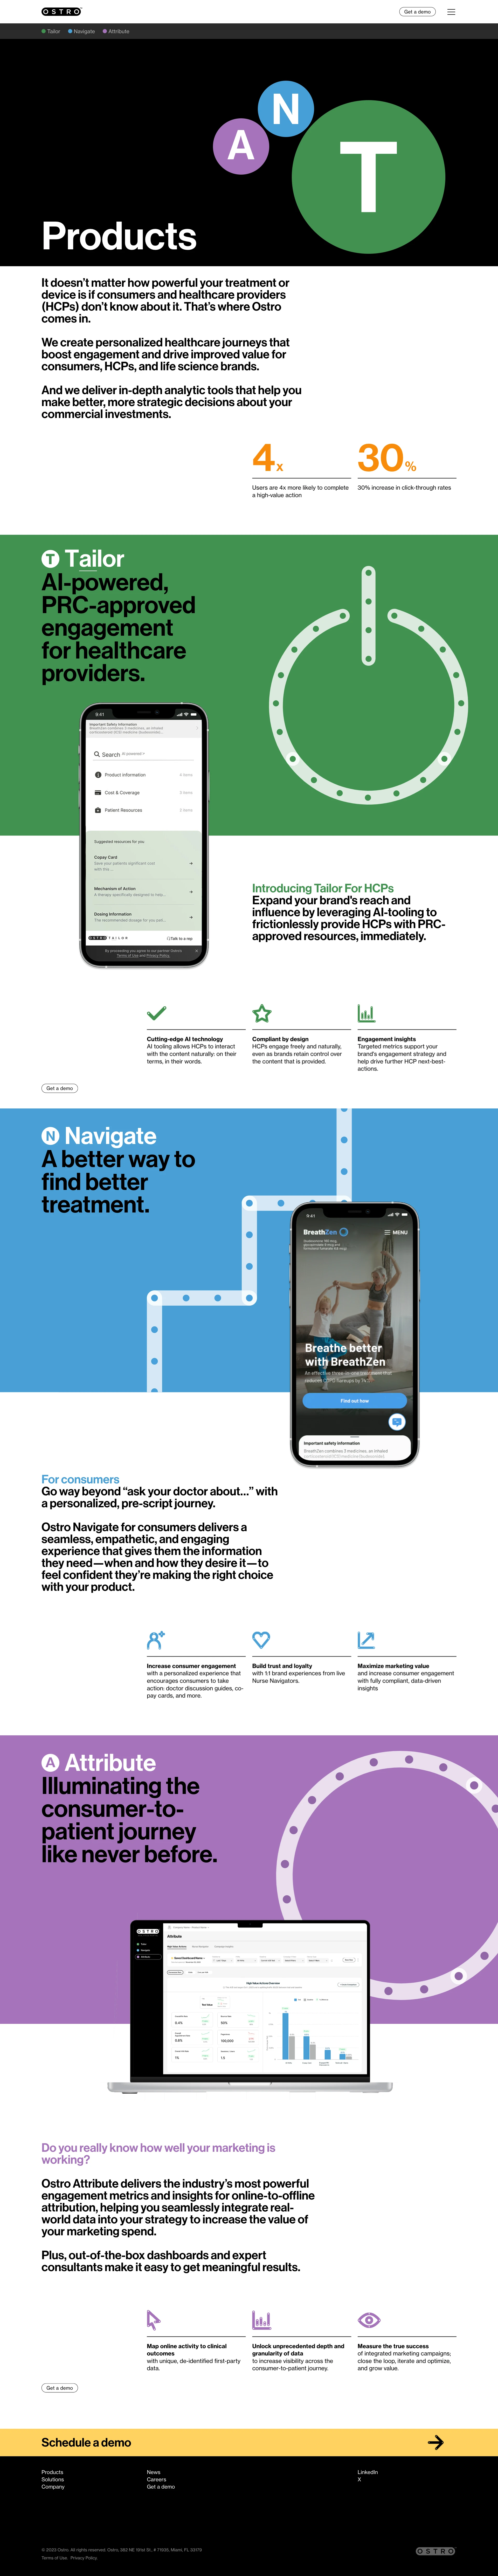 Ostro Landing Page Example: Get to well sooner. Ostro helps consumers and clinicians get the information they need for faster, more sustainable health outcomes.